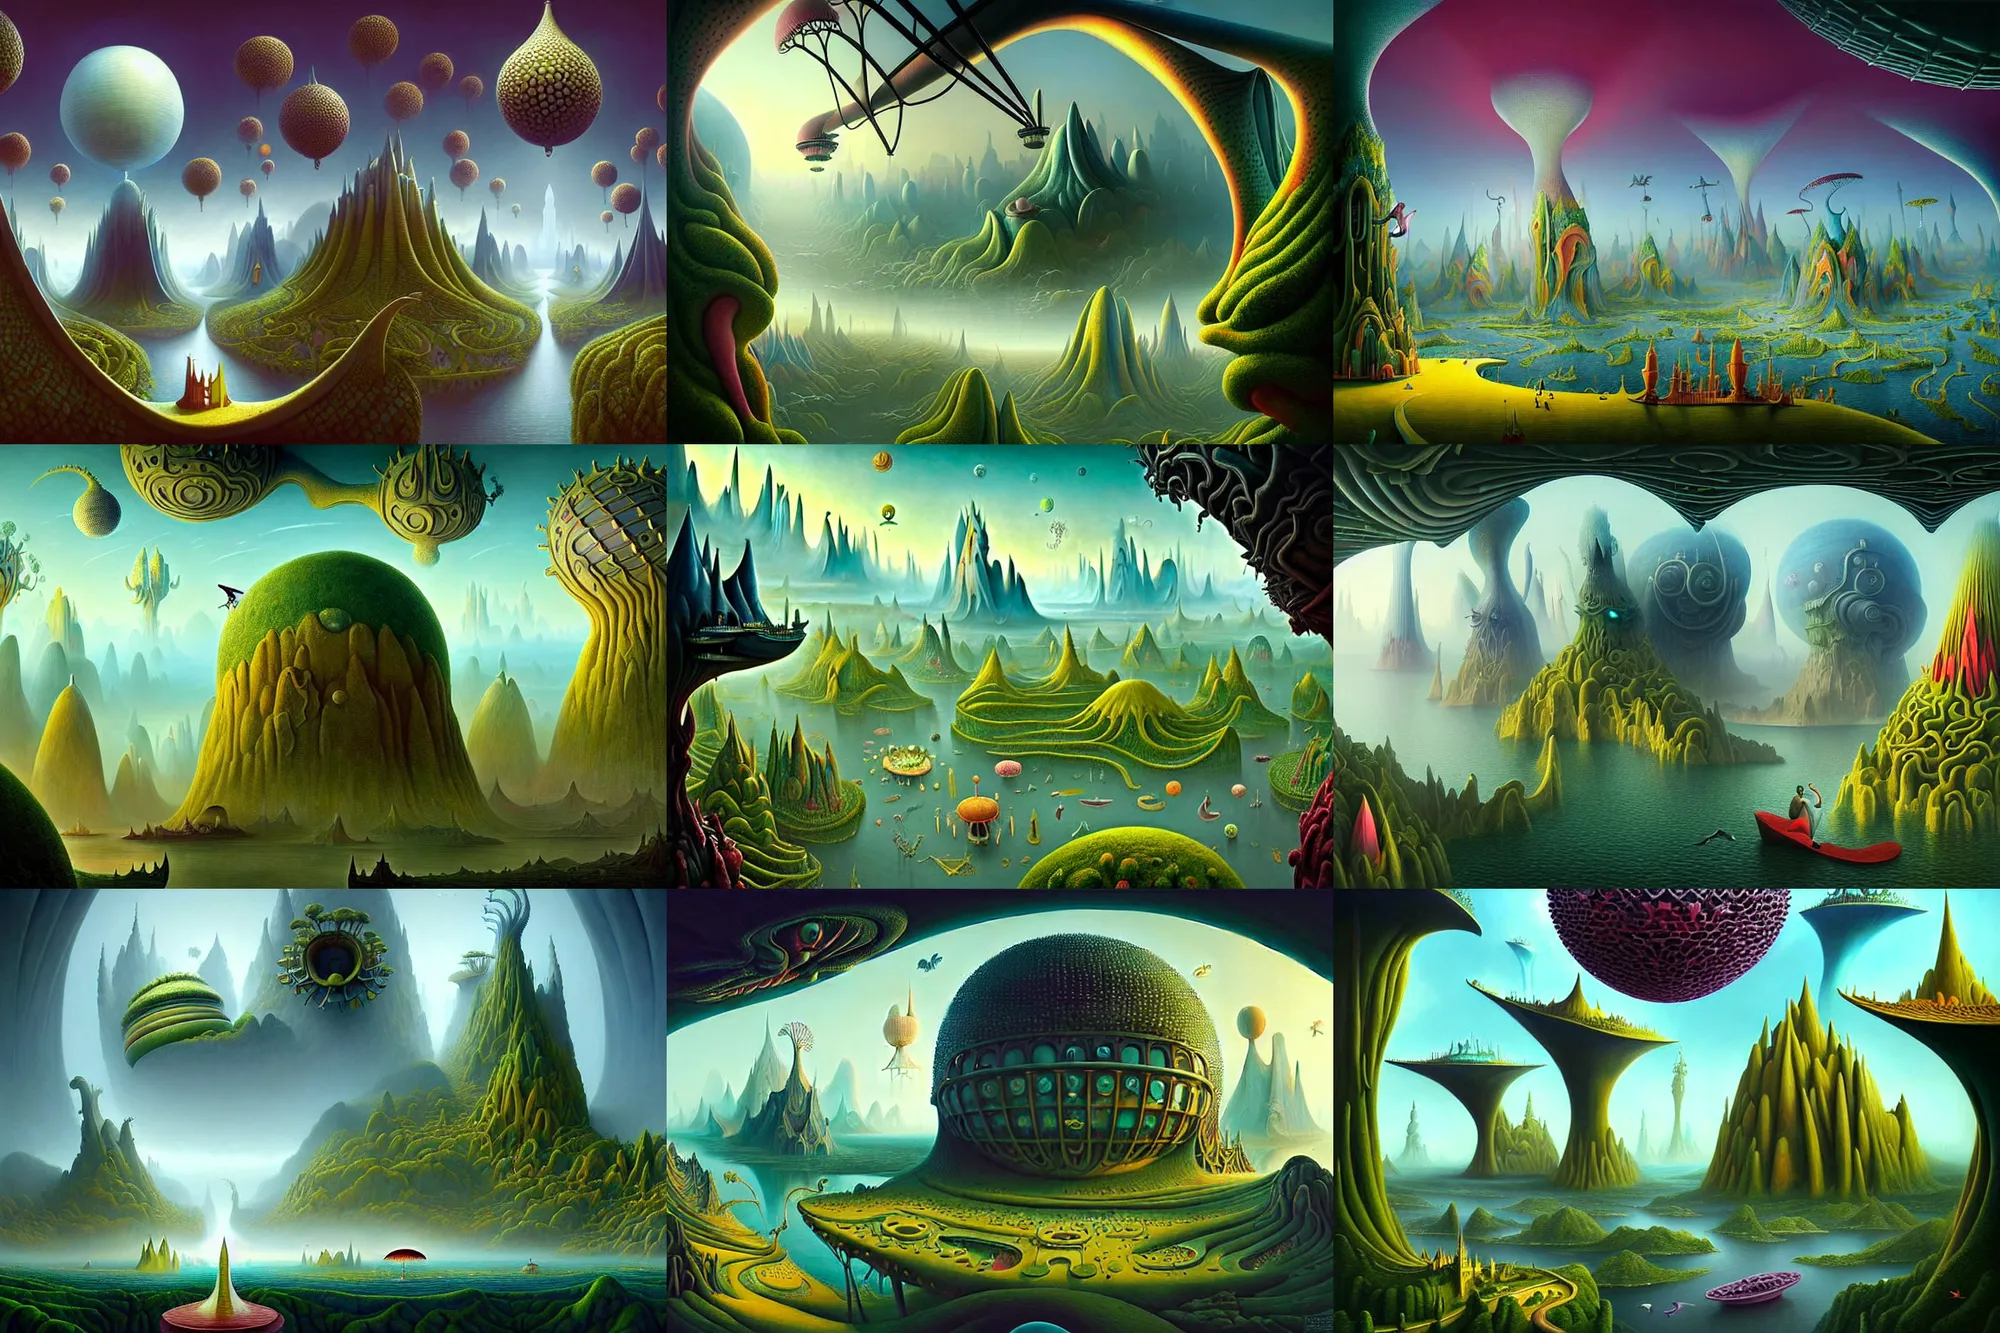 Prompt: a beguiling and insanely detailed matte painting of alien dream worlds with surreal architecture designed by Heironymous Bosch, mega structures inspired by Heironymous Bosch's Garden of Earthly Delights, vast surreal landscape and horizon by Asher Durand and Tyler Edlin and Cyril Rolando, masterpiece!!, grand!, imaginative!!!, whimsical!!, epic scale, intricate details, sense of awe, elite, wonder, insanely complex, masterful composition, sharp focus, fantasy realism, dramatic lighting